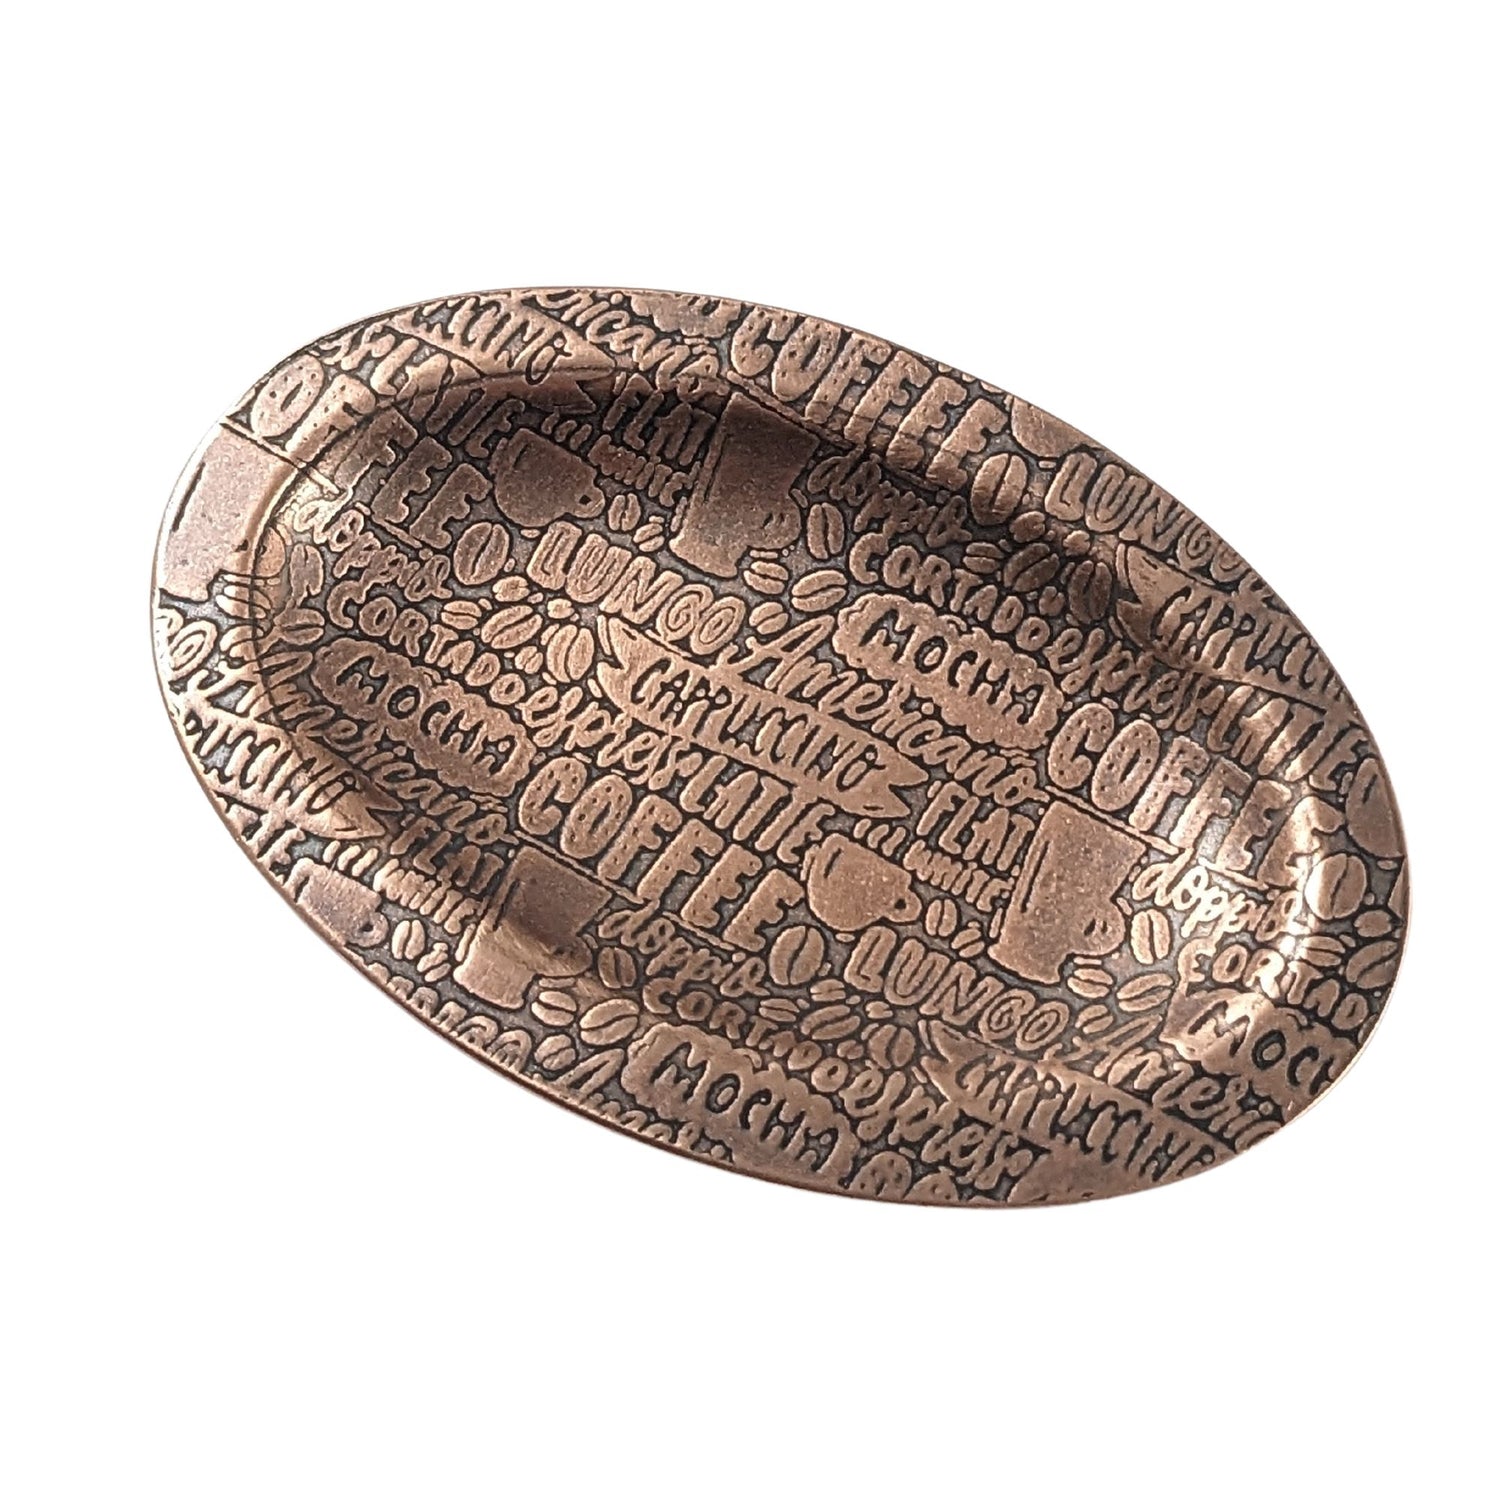 An oval copper ring dish with a raised edge. The dish has an impressed pattern of coffee order names.